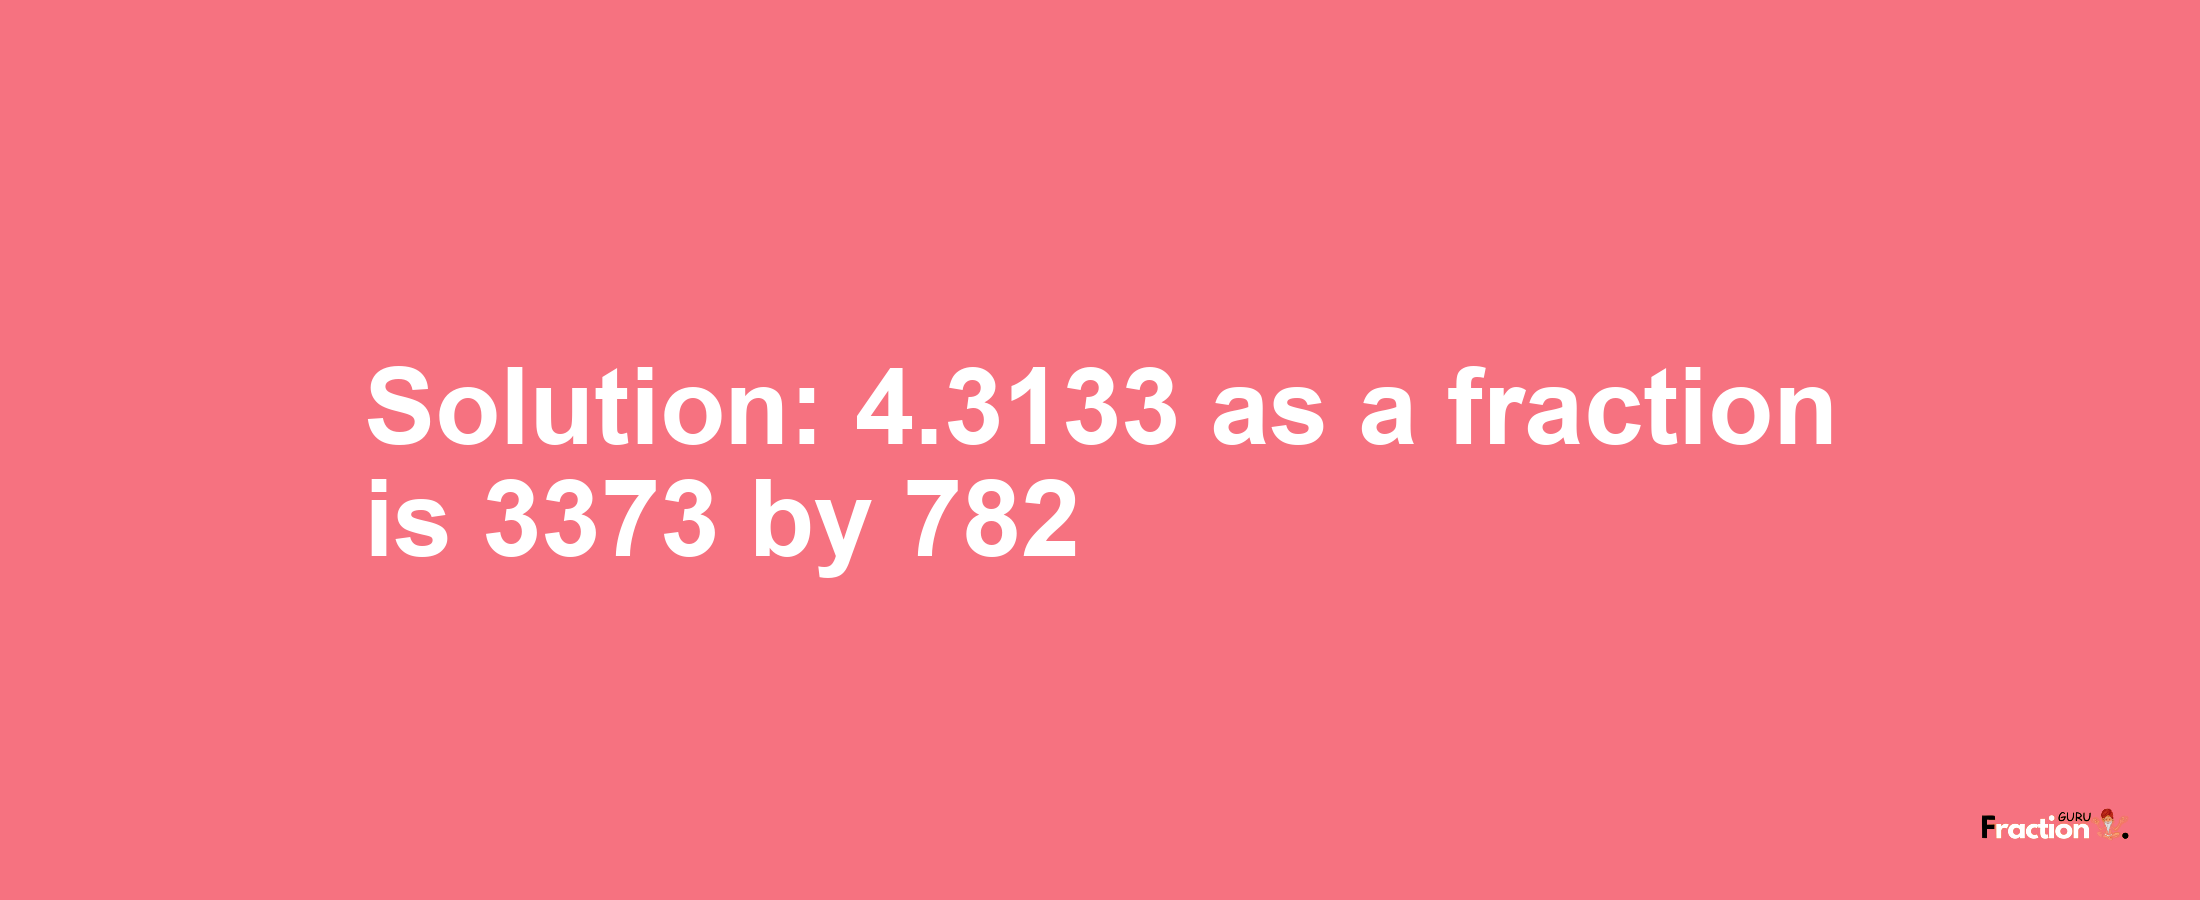 Solution:4.3133 as a fraction is 3373/782